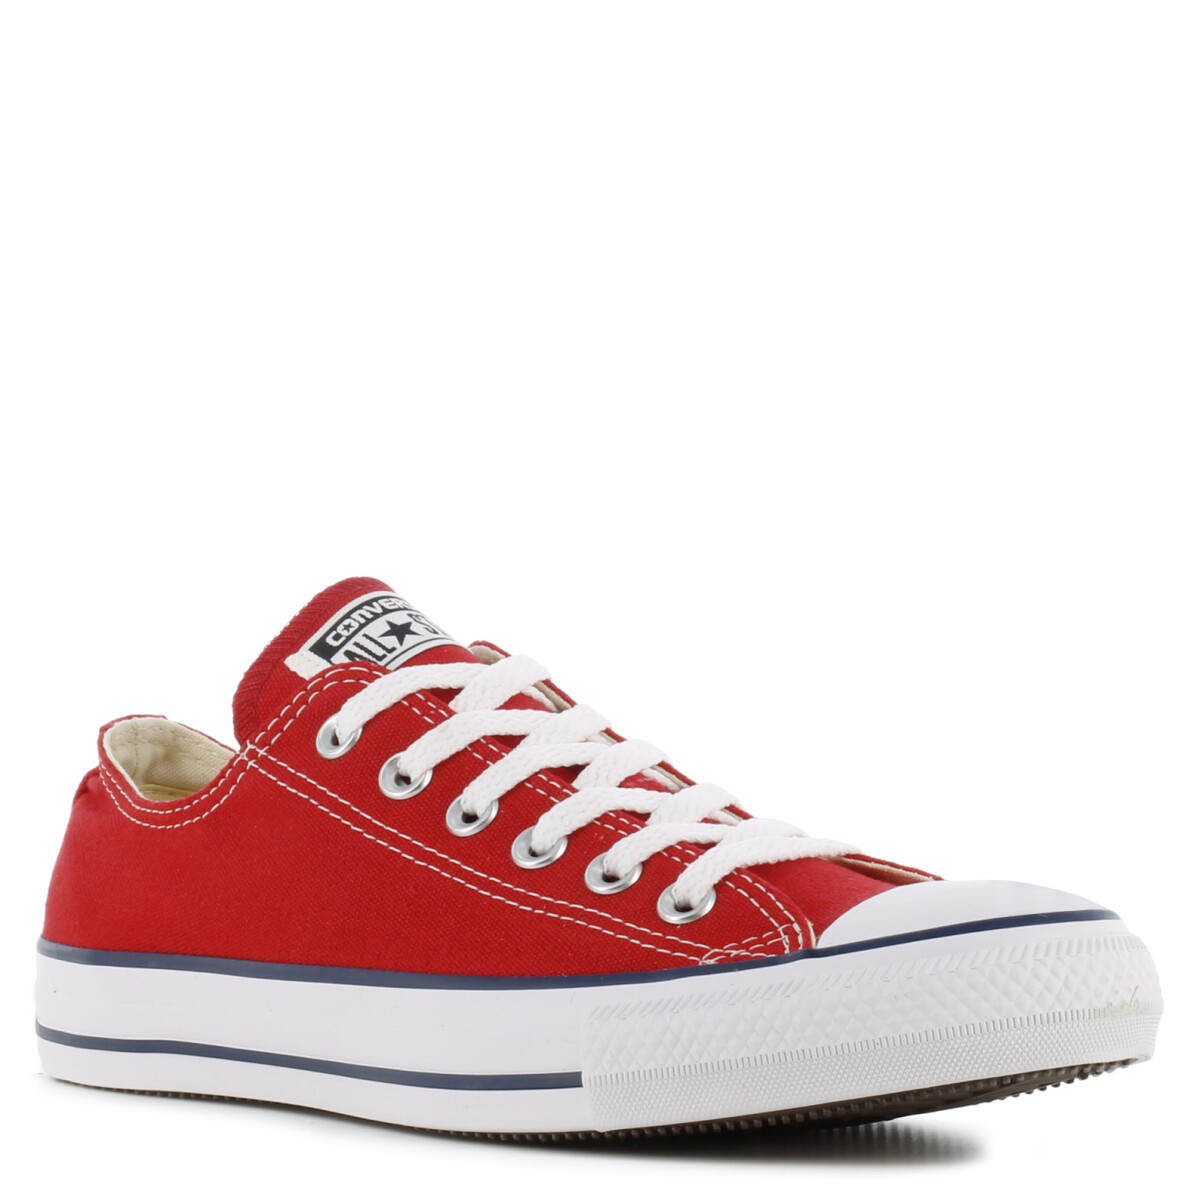 Classic - Basket Low Converse - All Star - Red 